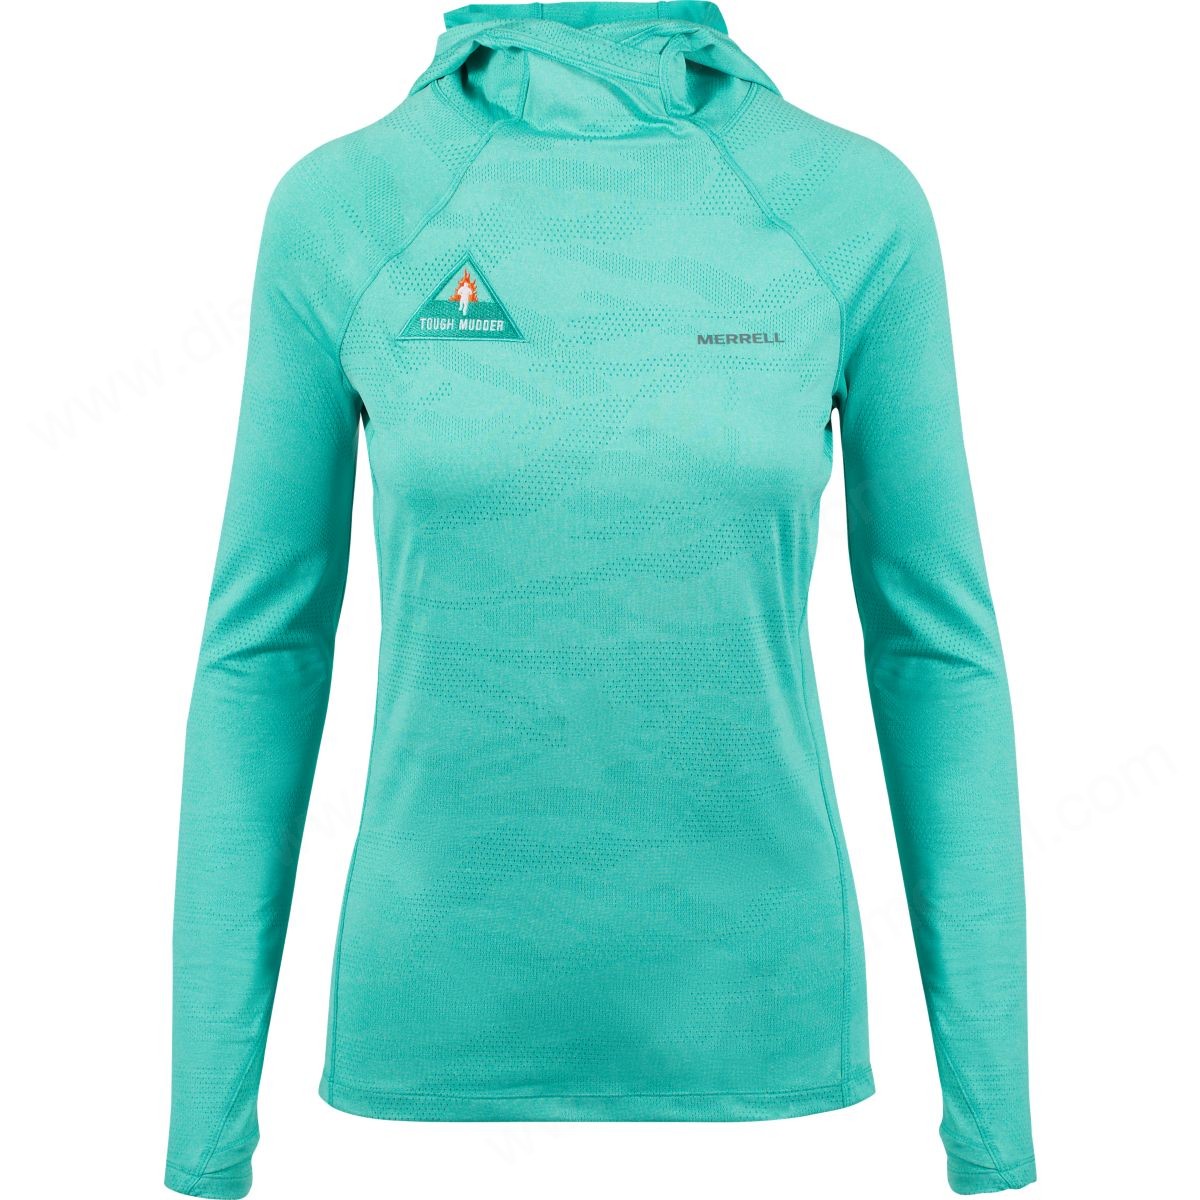 Merrell Lady's Tough Mudder Torrent Long Sleeve Hooded Top Baltic Heather - Merrell Lady's Tough Mudder Torrent Long Sleeve Hooded Top Baltic Heather